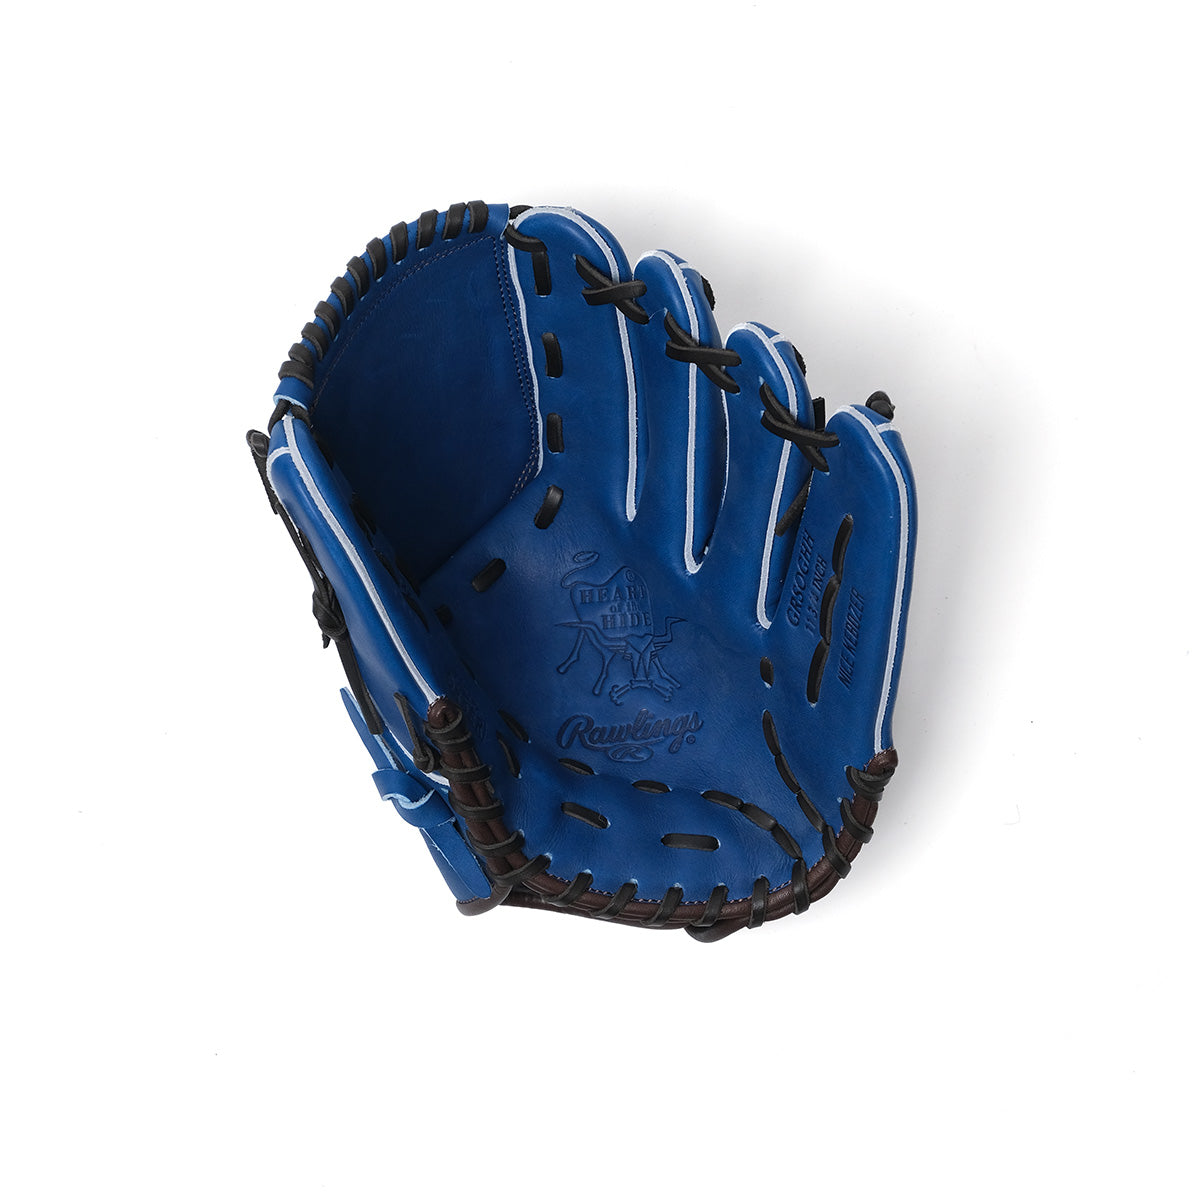 RAWLINGS PITCHER'S GLOVE CUSTOMIZED BY KEBOZ